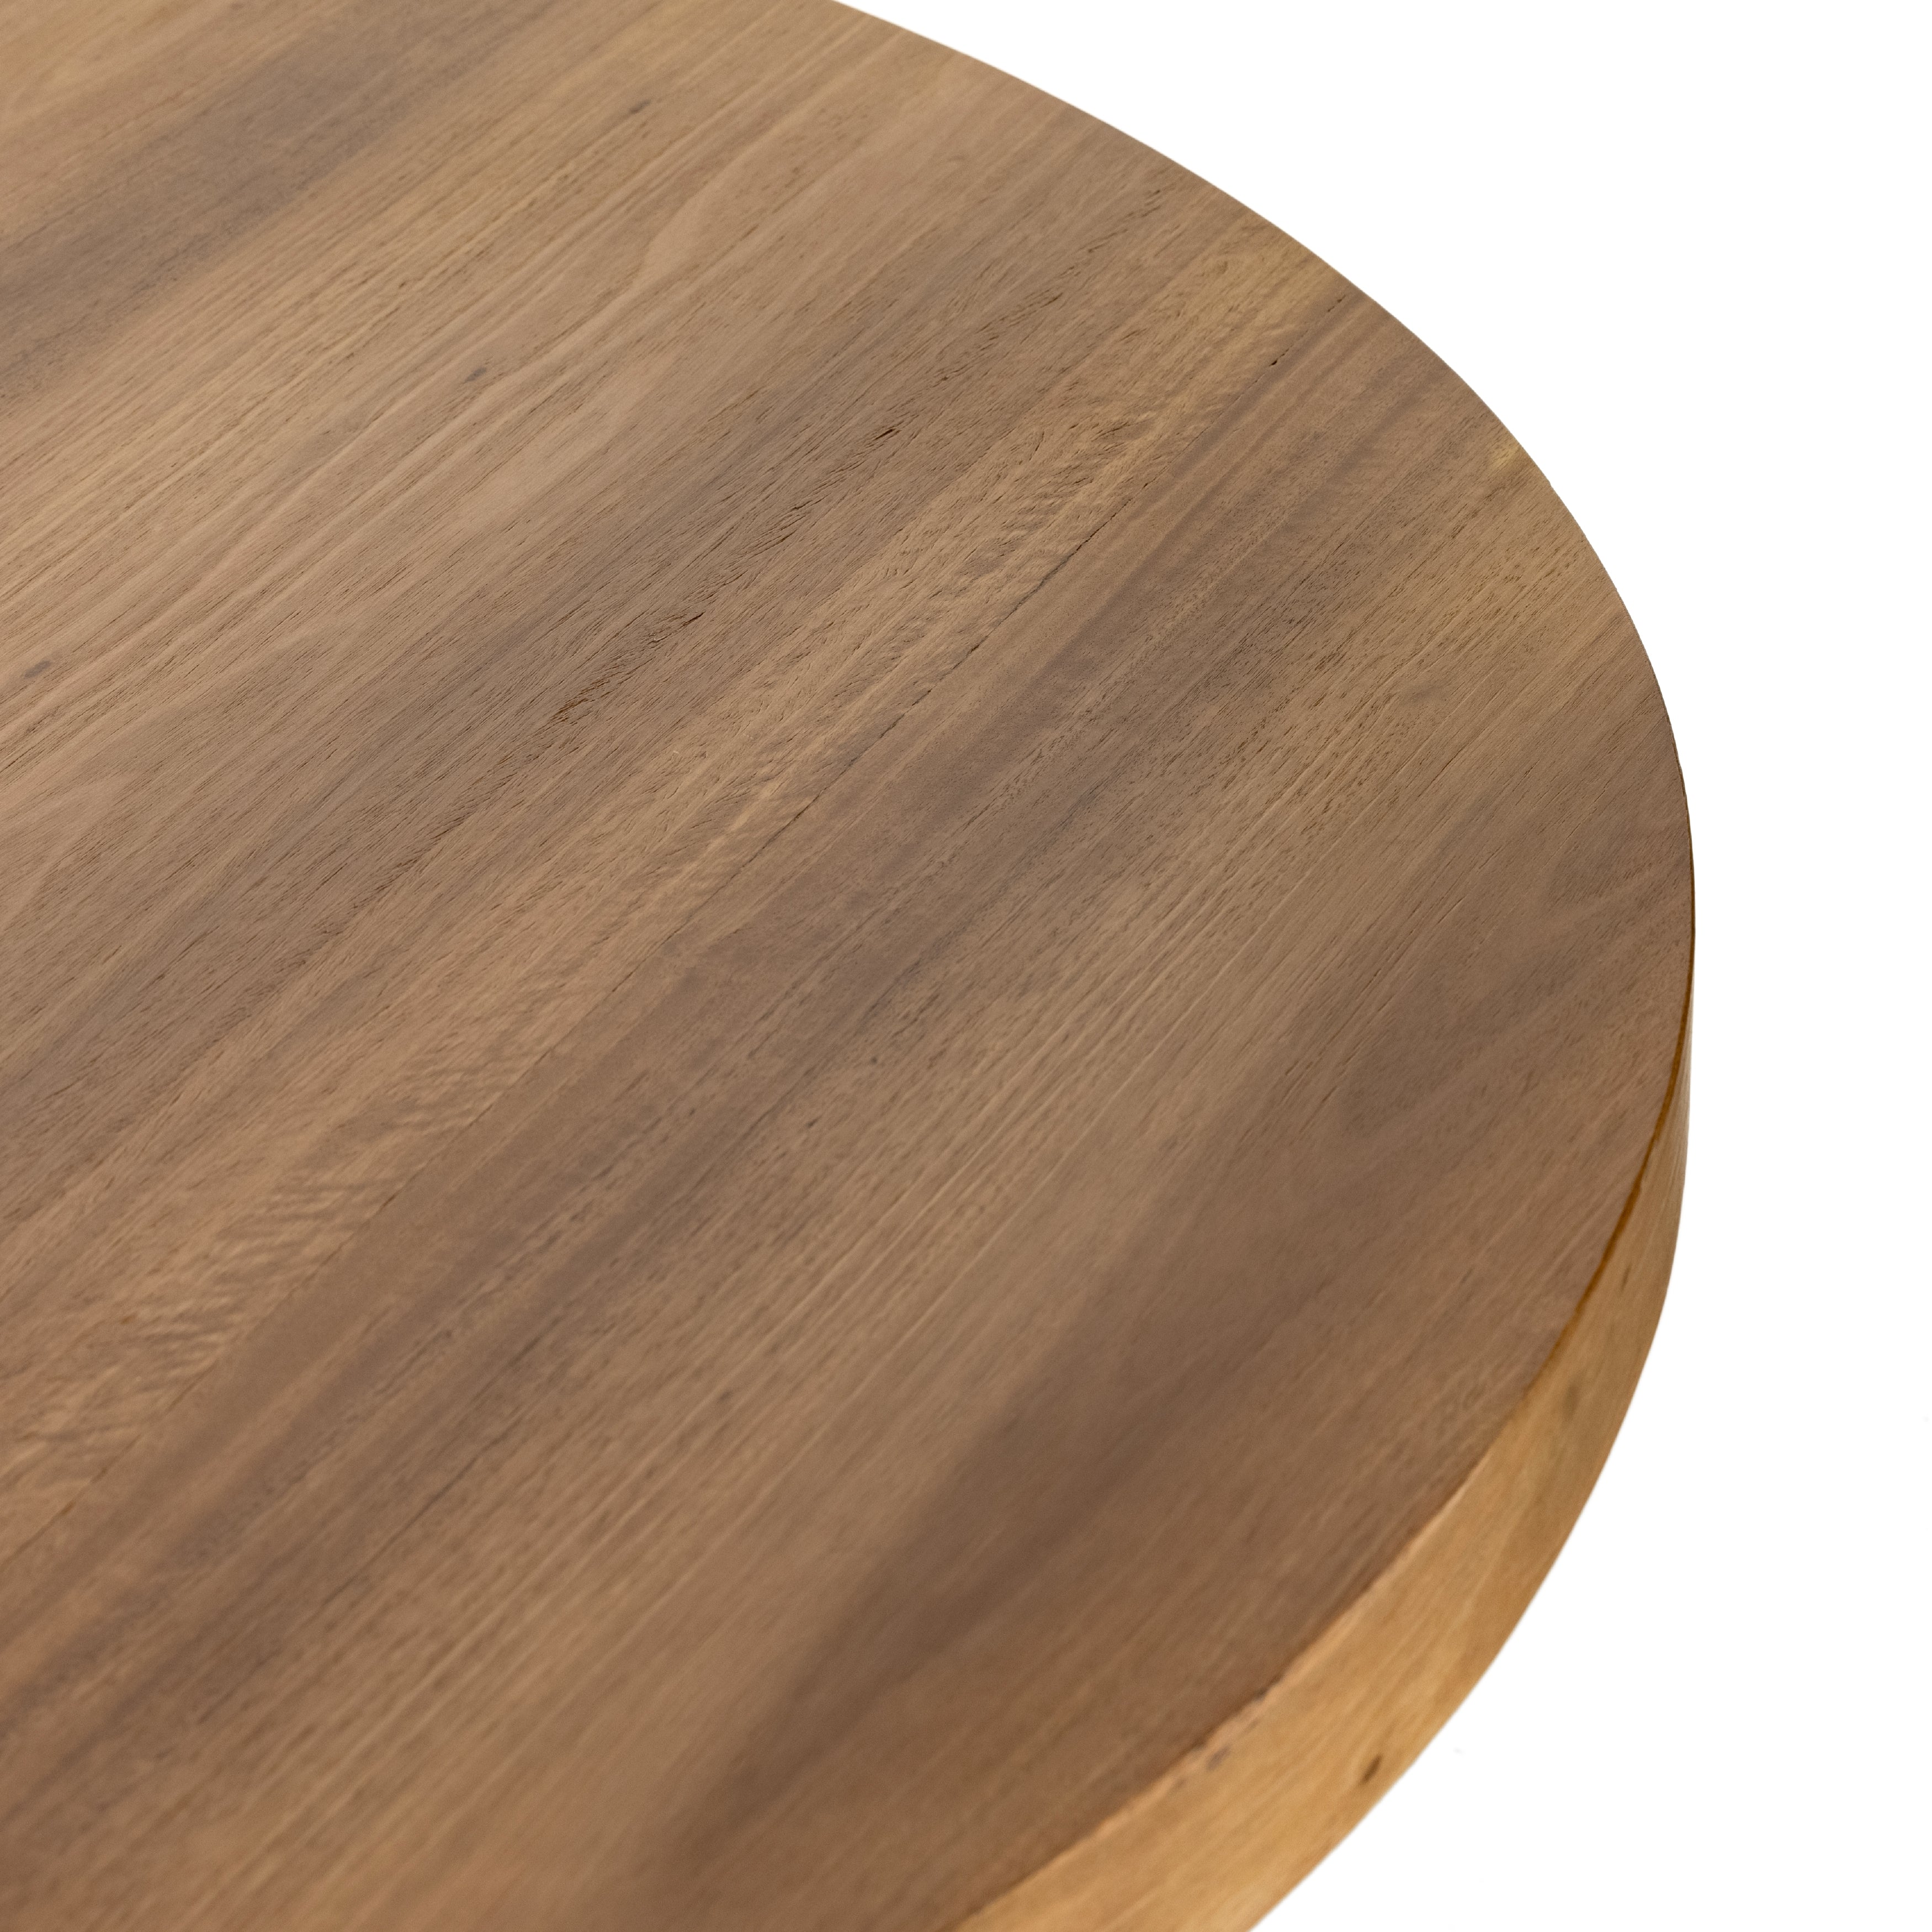 Stunning forces of nature are captured in the Hudson round dining table featured in natural yukas. The table is hand-shaped into a beautifully rounded silhouette for a light, monochromatic look. Reflective of woods' natural character, a slight color variance is possible from piece to piece. Amethyst Home provides interior design services, furniture, rugs, and lighting in the Scottsdale metro area.